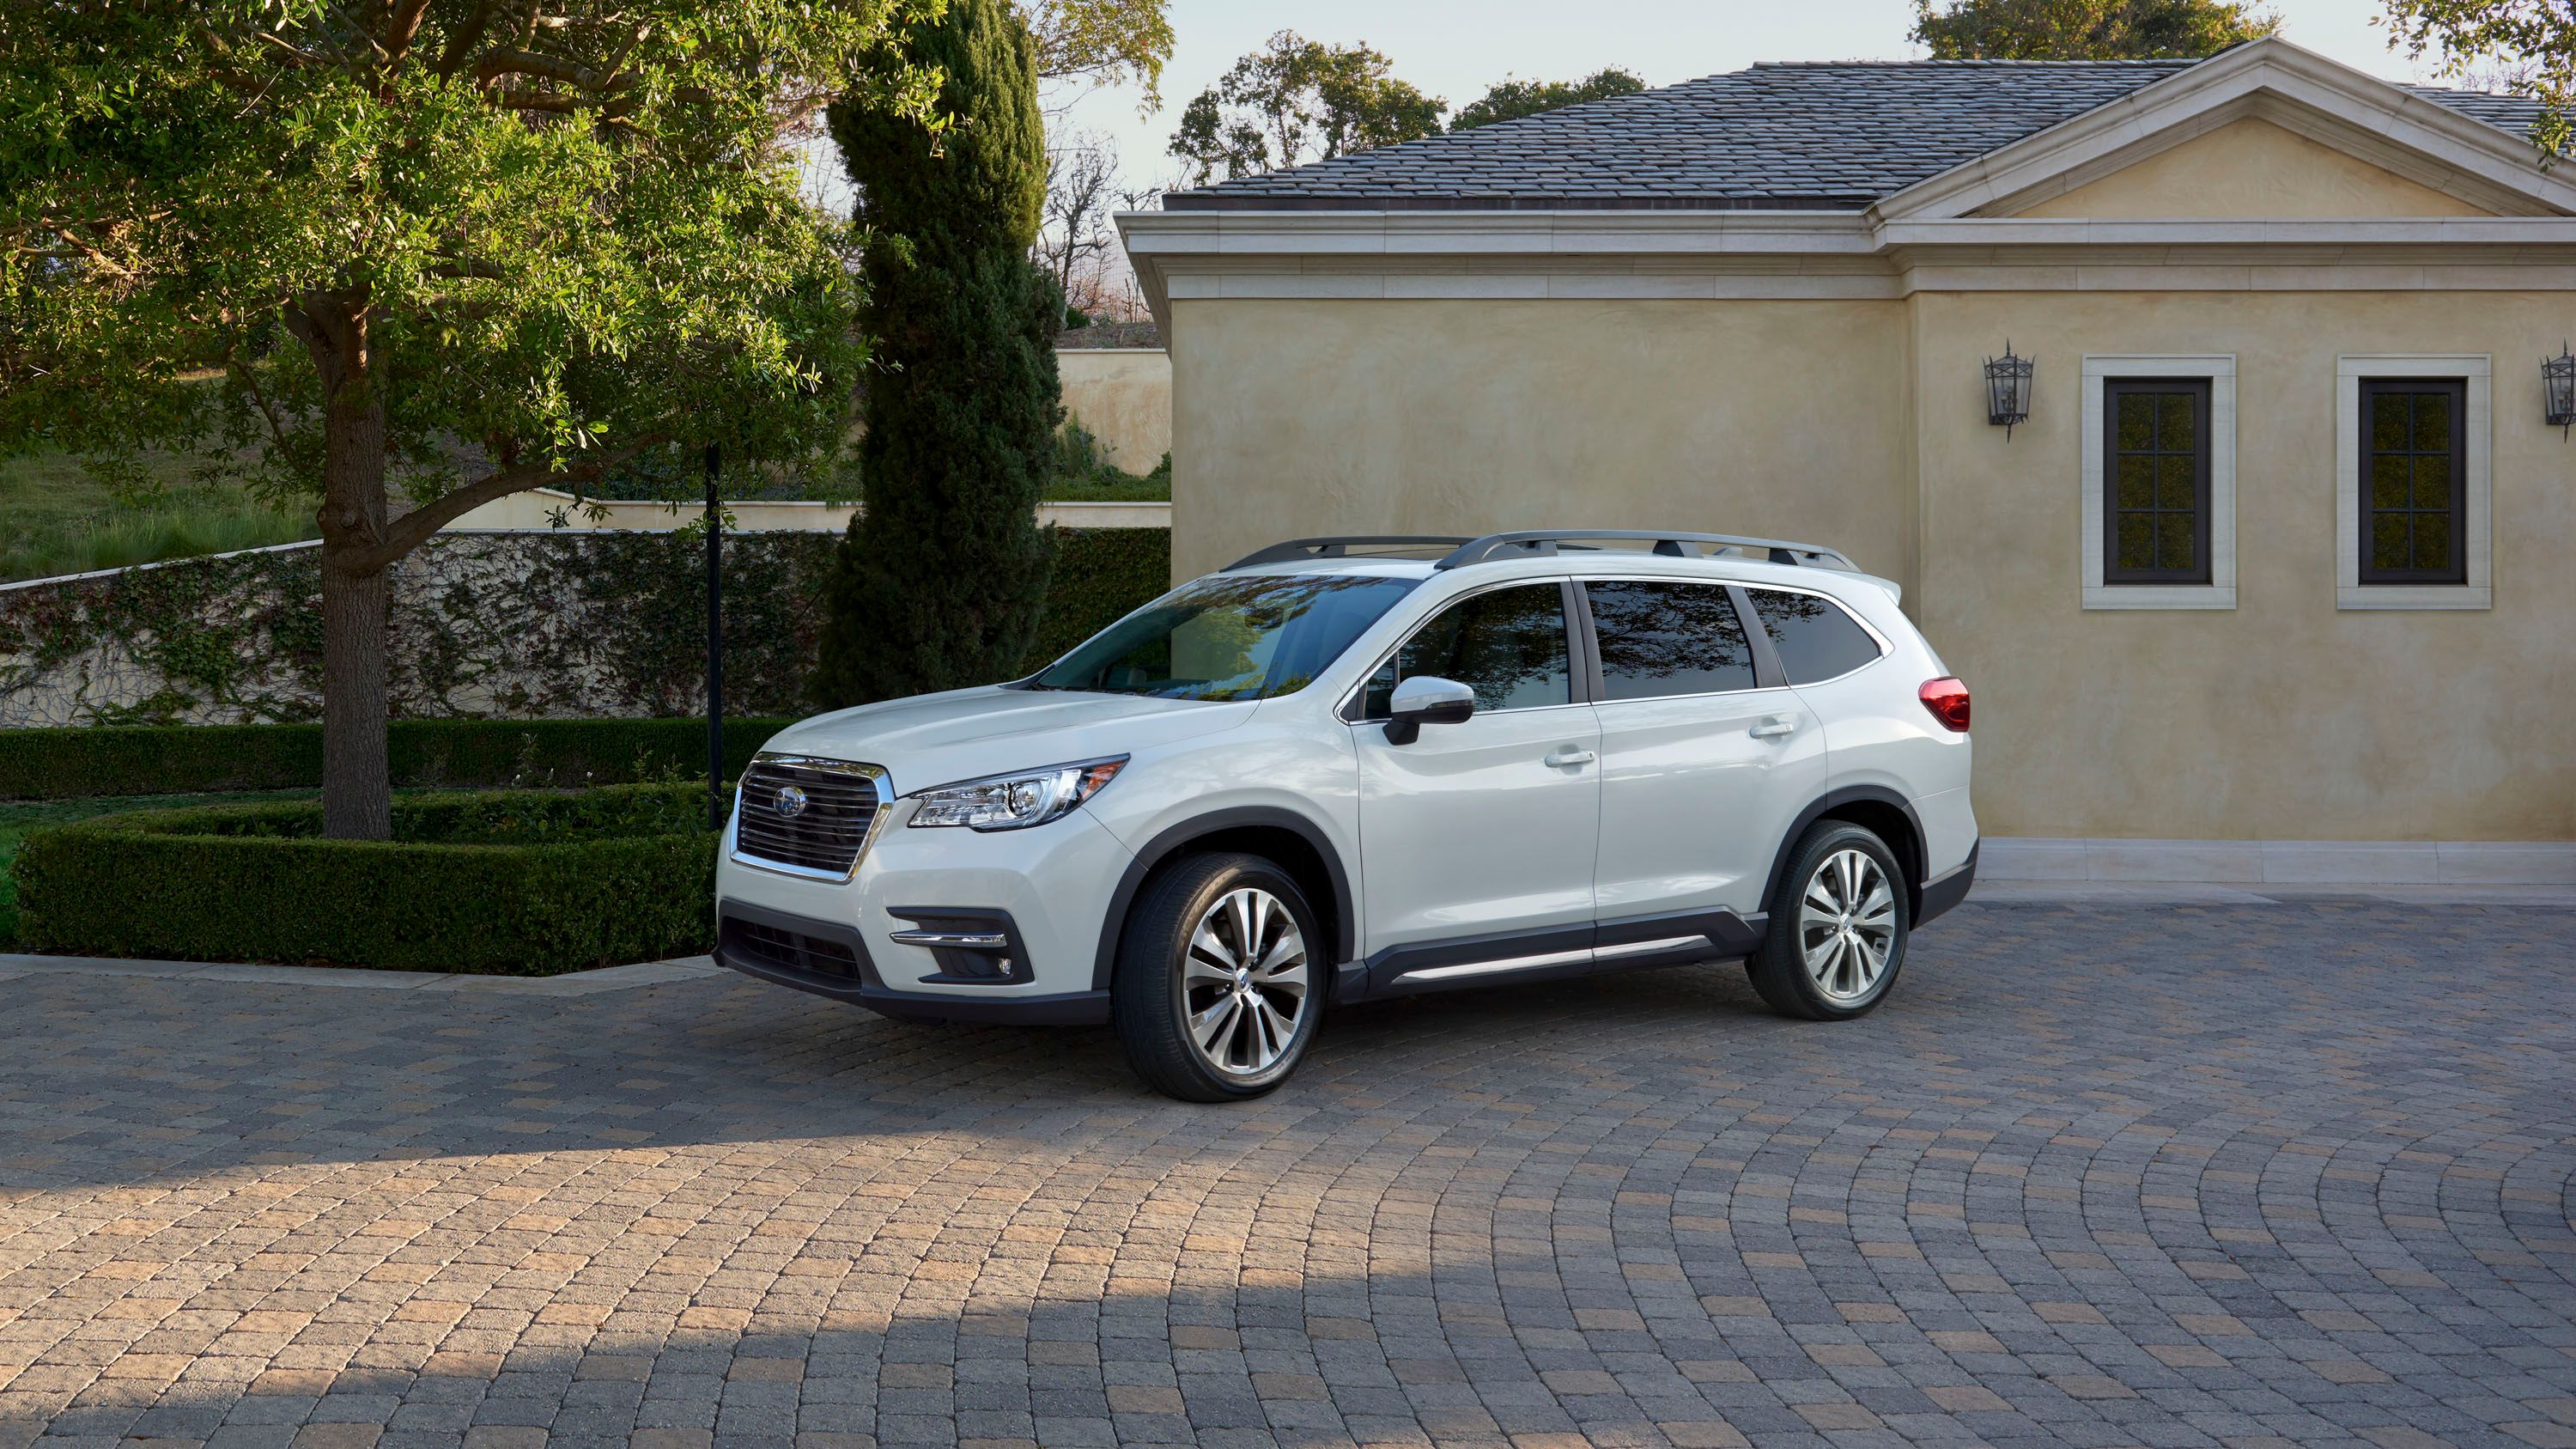 2018 Subaru Ascent Unveiled in L.A., Nowhere Near As Bold As Viziv-7 Concept